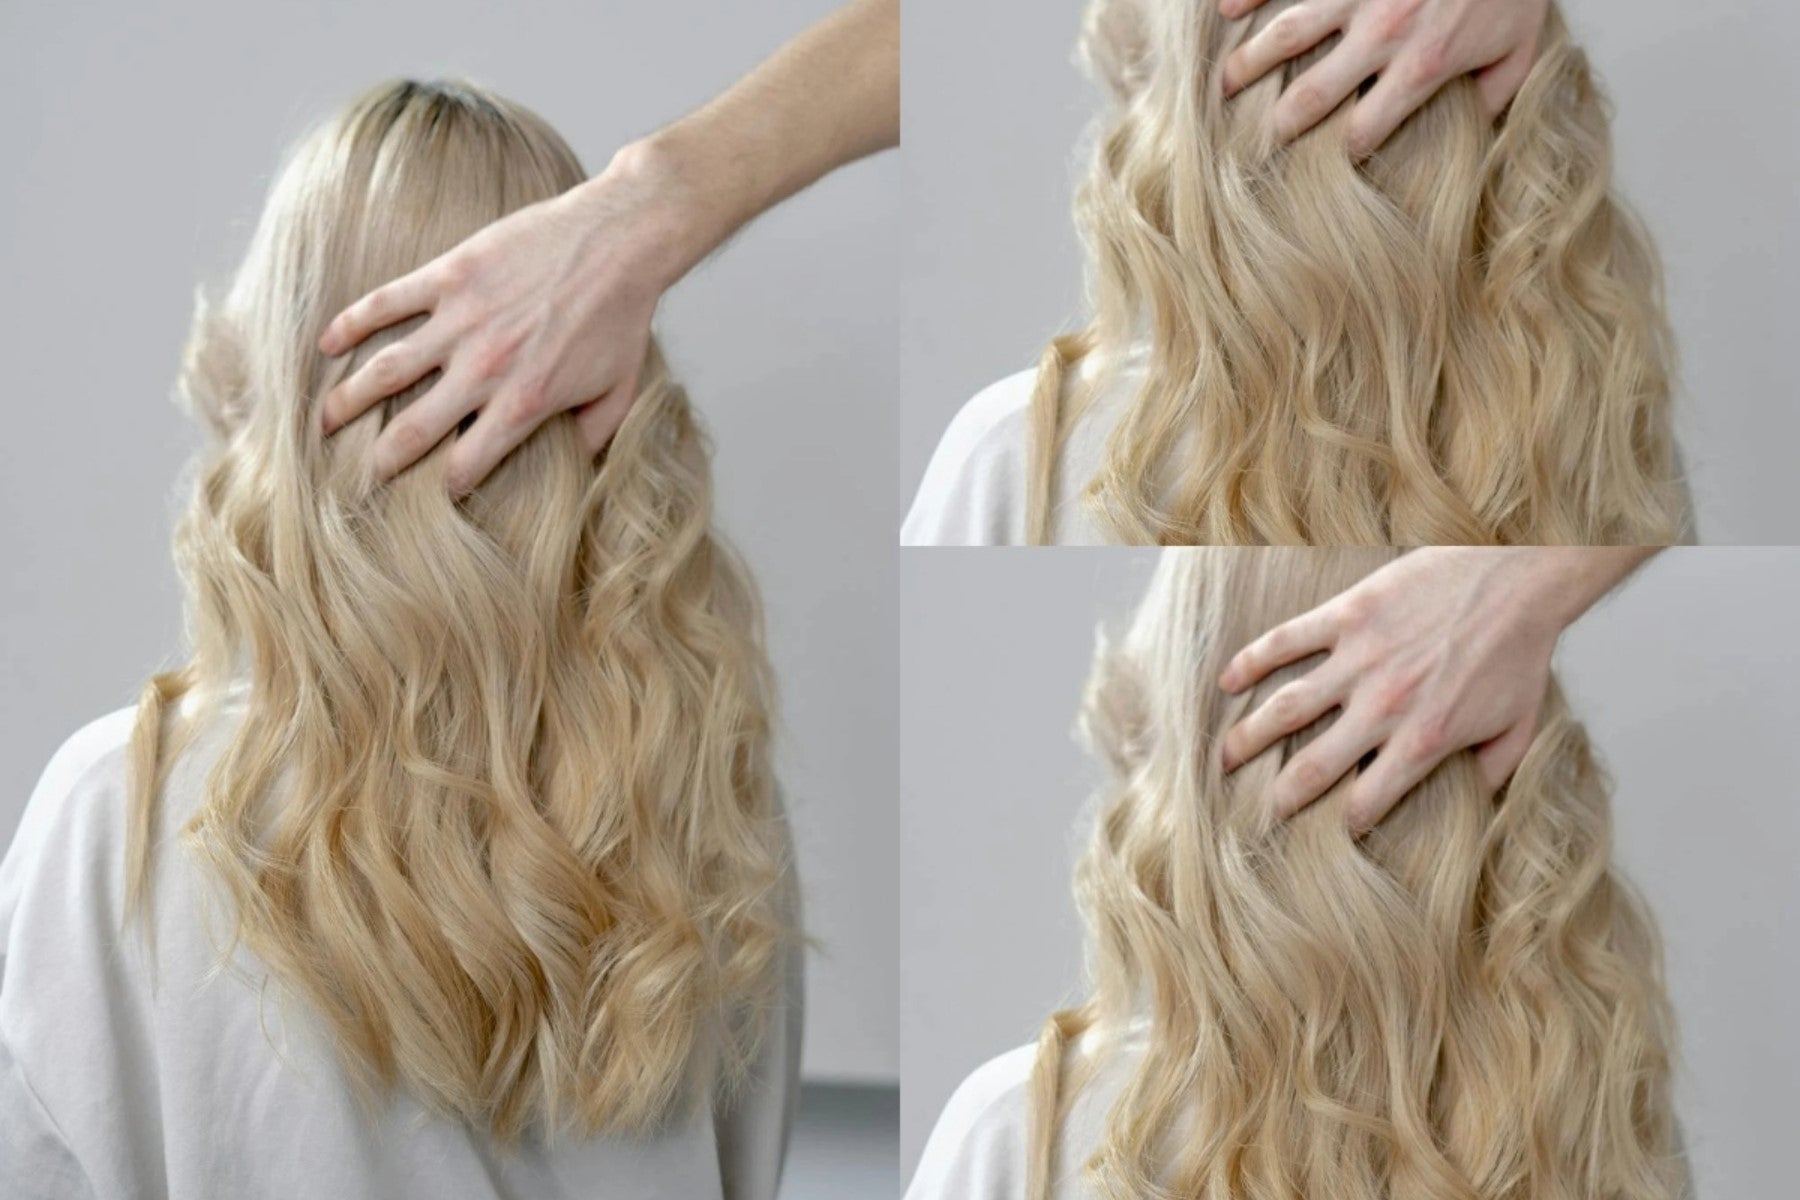 Image of the back of a blonde girl's head with fresh hair extensions. Taken from Pexels